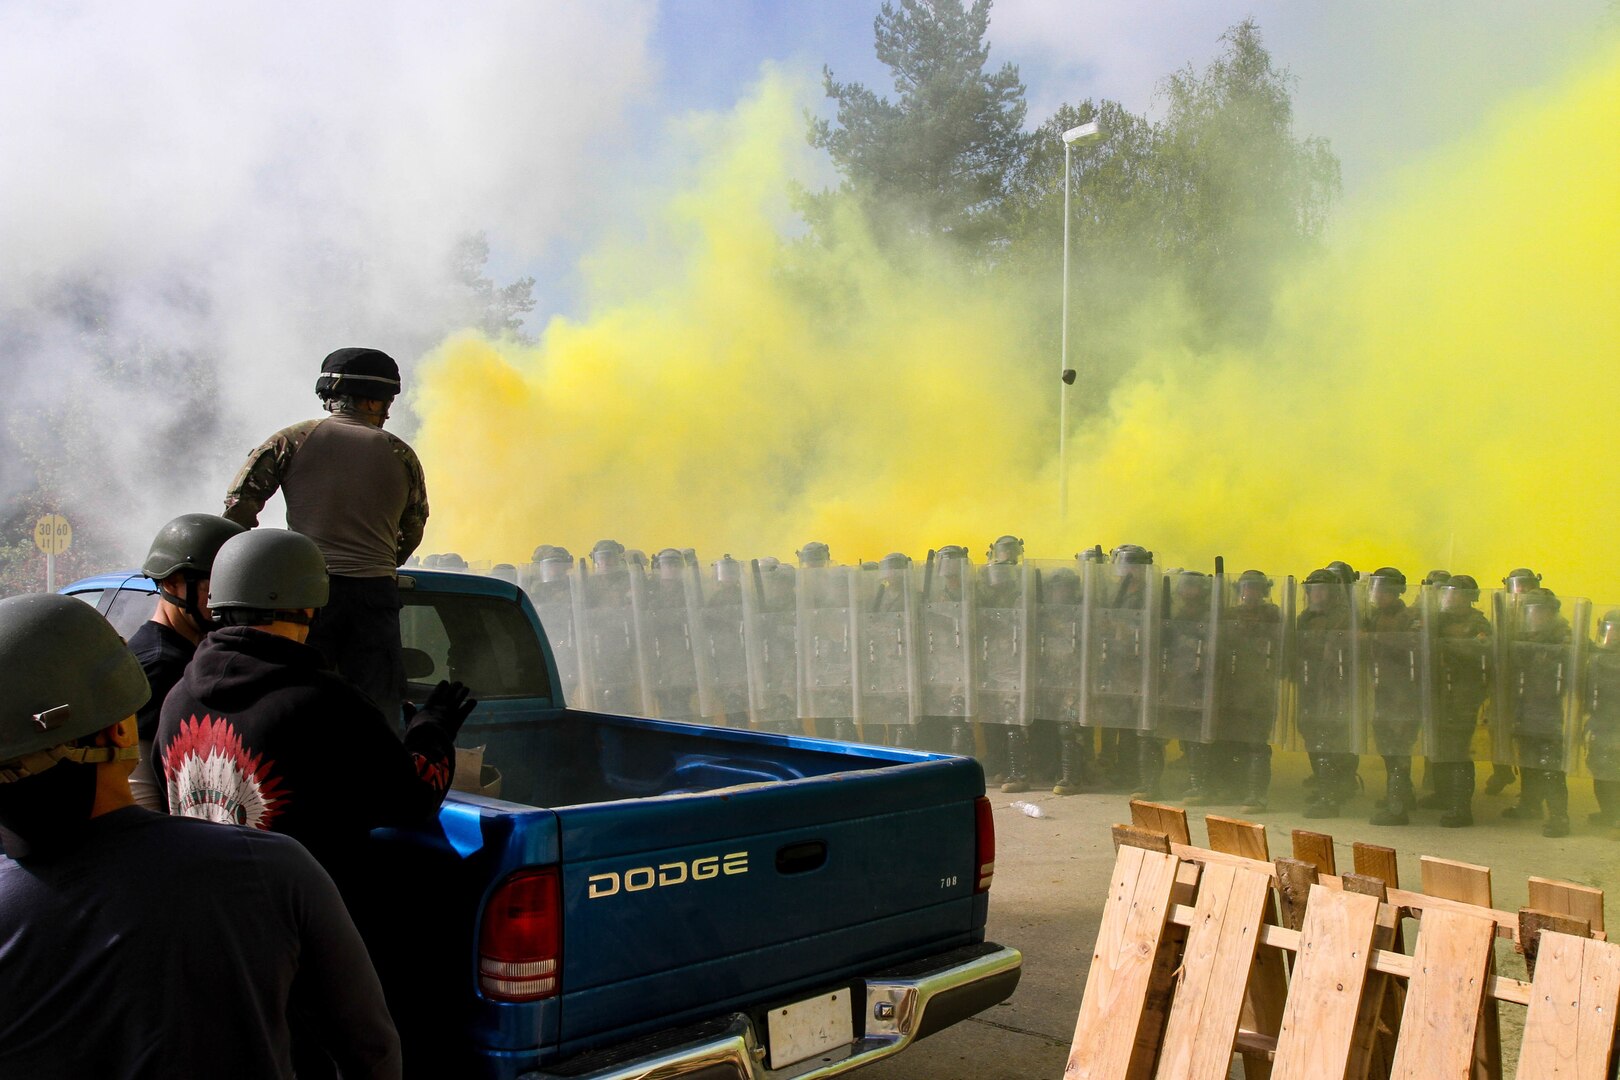 Arizona National Guard, 1st Battalion, 158th Infantry Regiment Soldiers, together with Moldovan soldiers, face an aggressive crowd of rioters throwing smoke and rocks during a situational training exercise as part of Steppe Eagle 2014 exercise, Oct. 4, at the Joint Multinational Readiness Training Center in Hohenfels, Germany. 